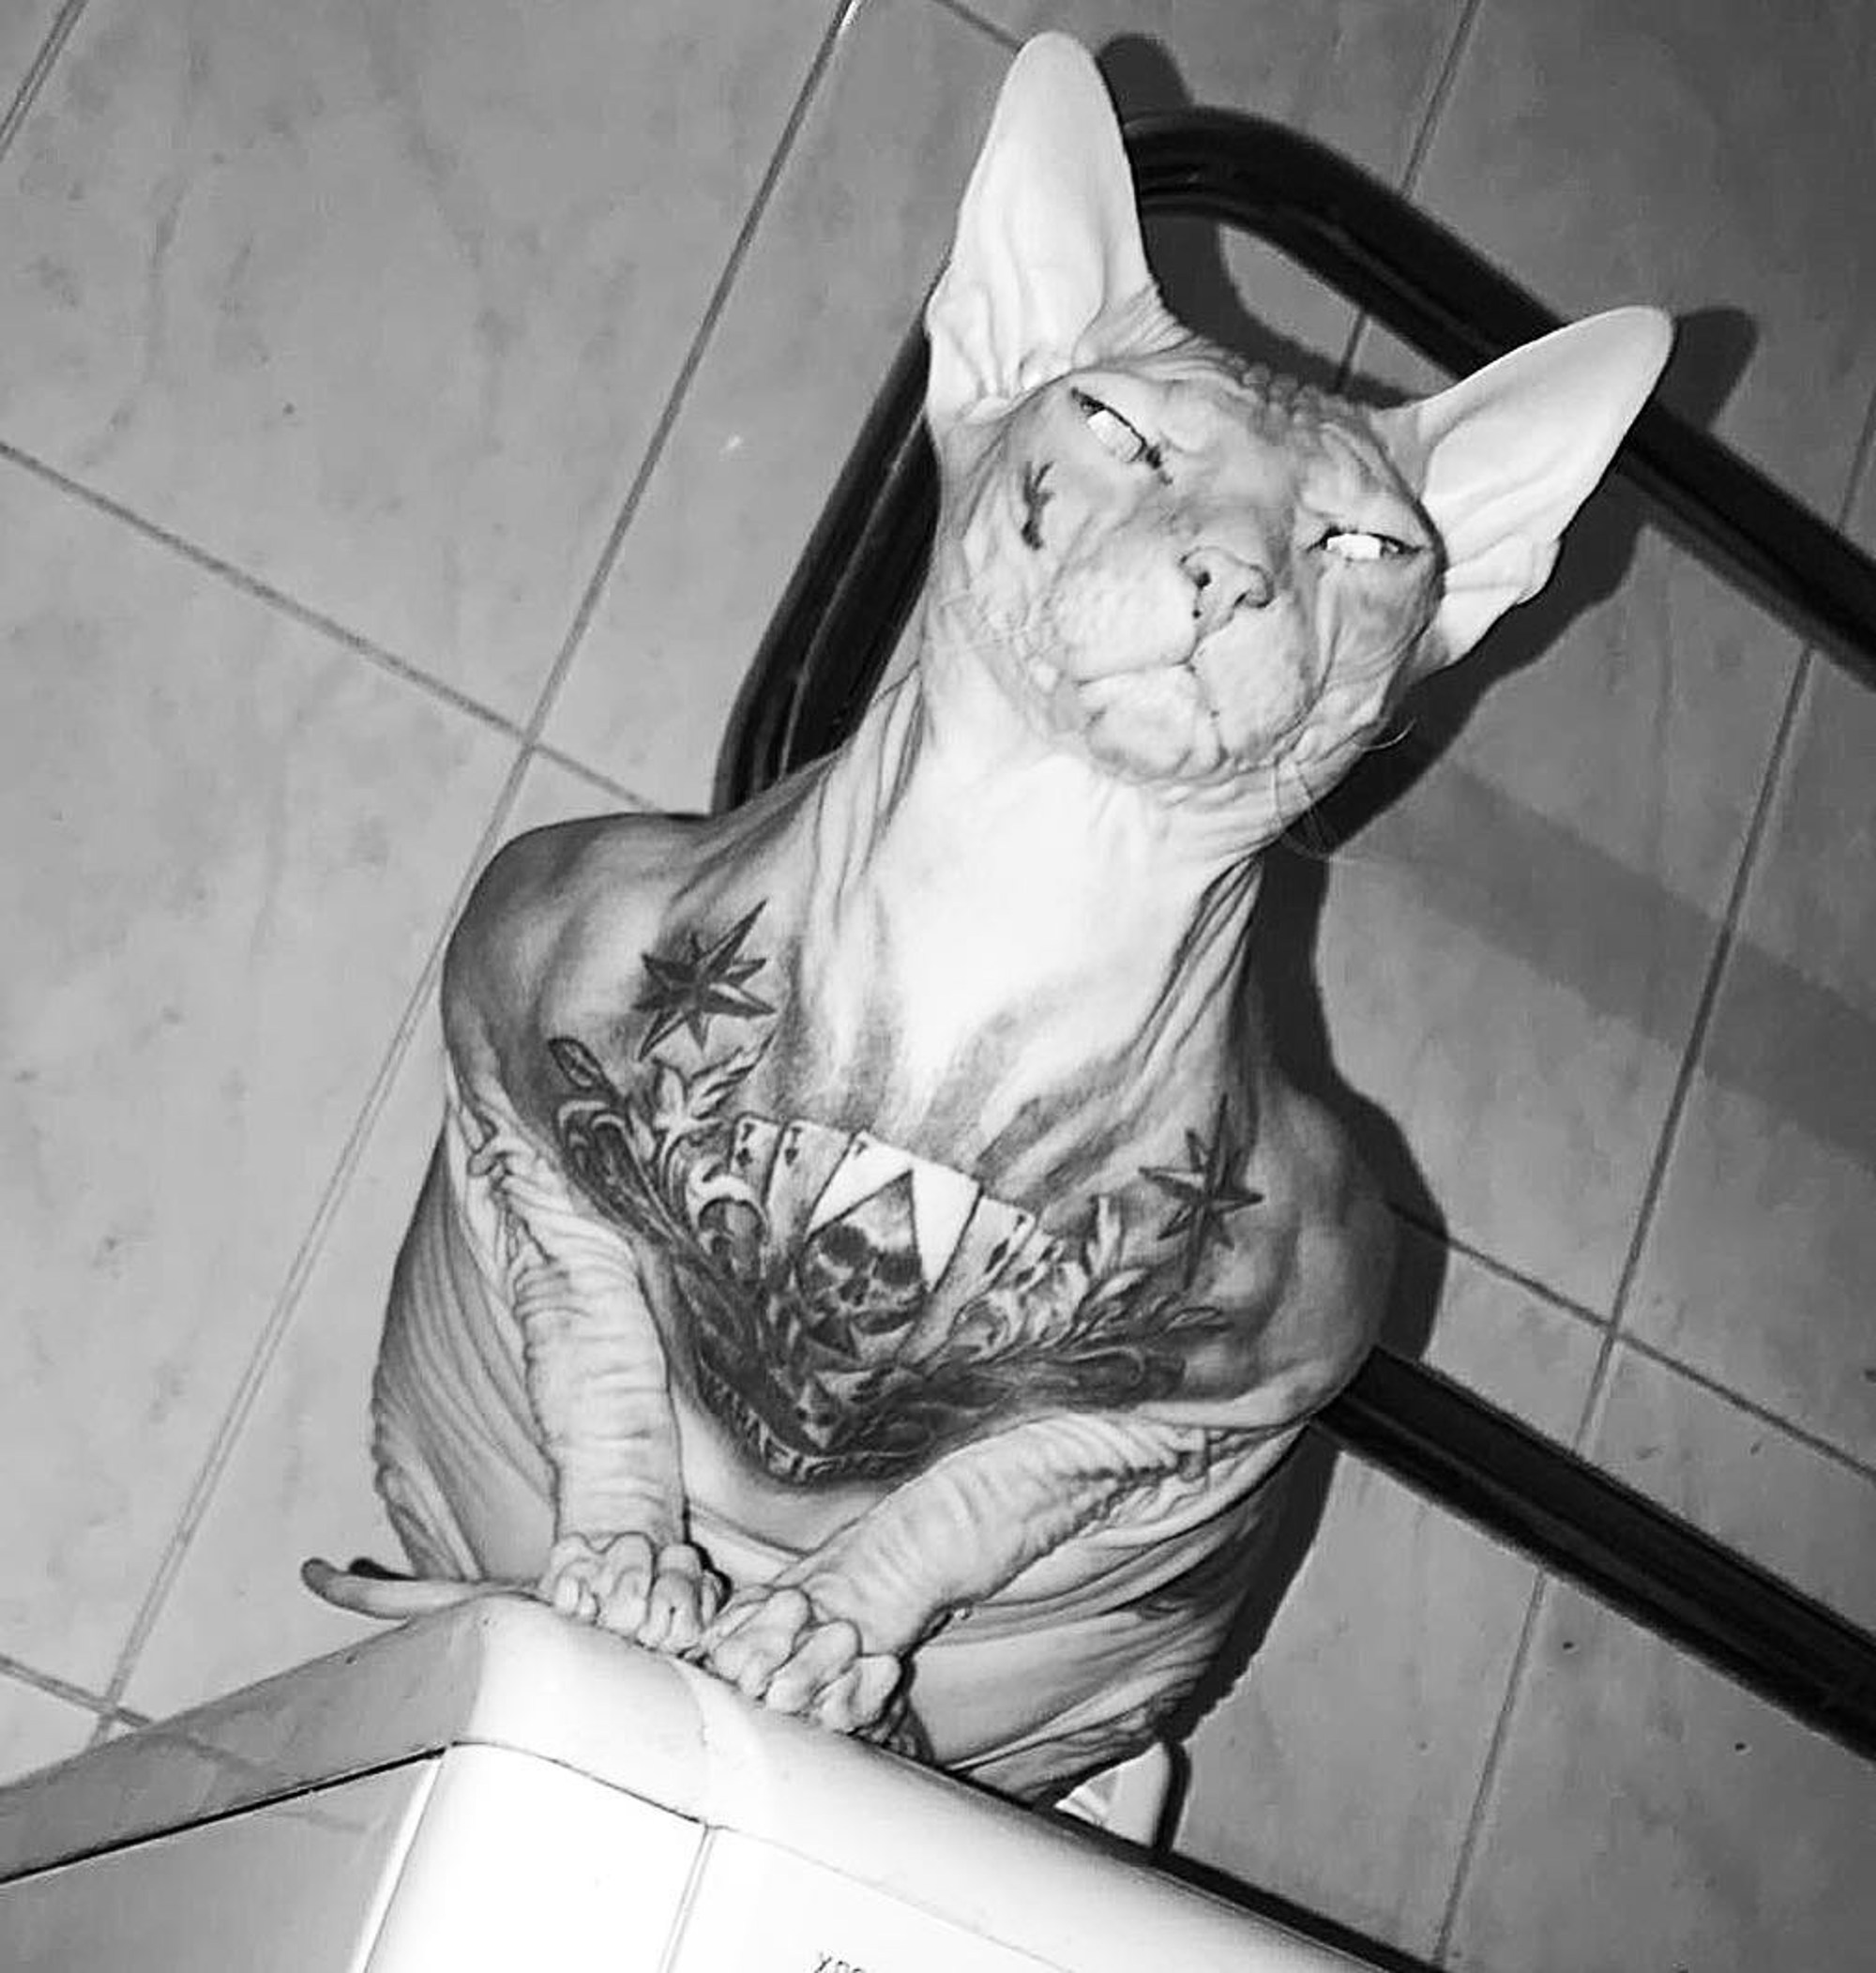 MMA Fighter Loses His Heavily-Tattooed Sphynx Cat.